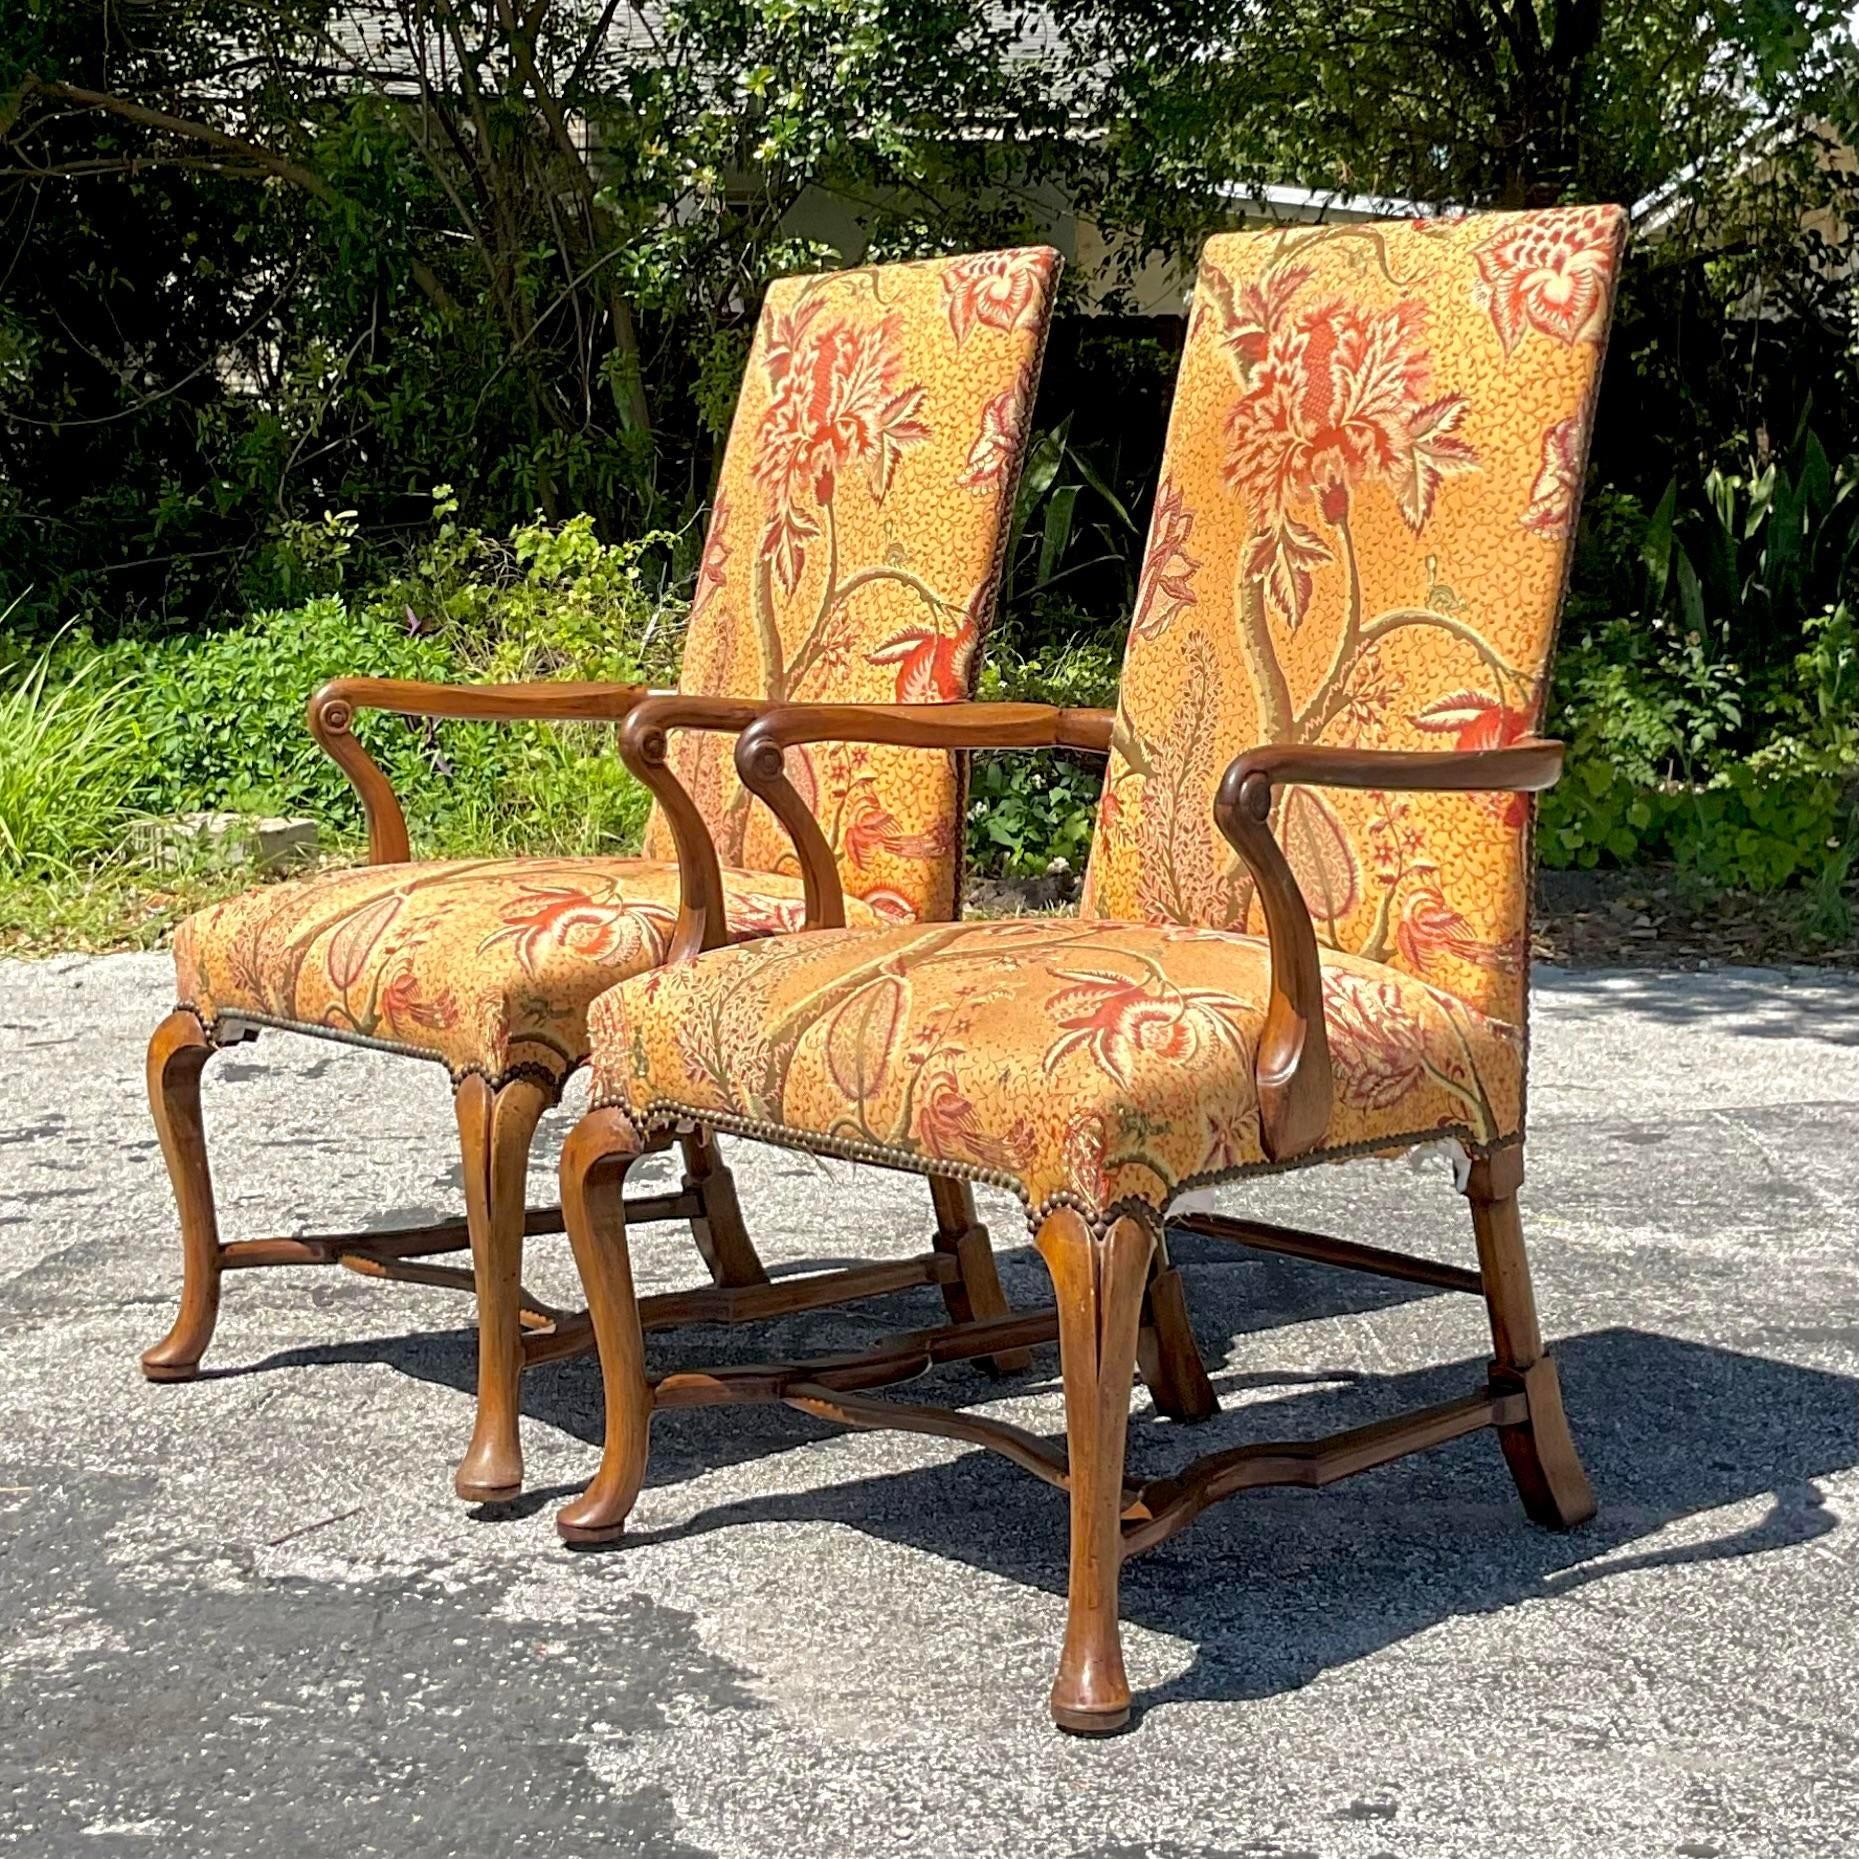 20th Century Vintage Regency Shepard’s Crook High Back Chairs - a Pair For Sale